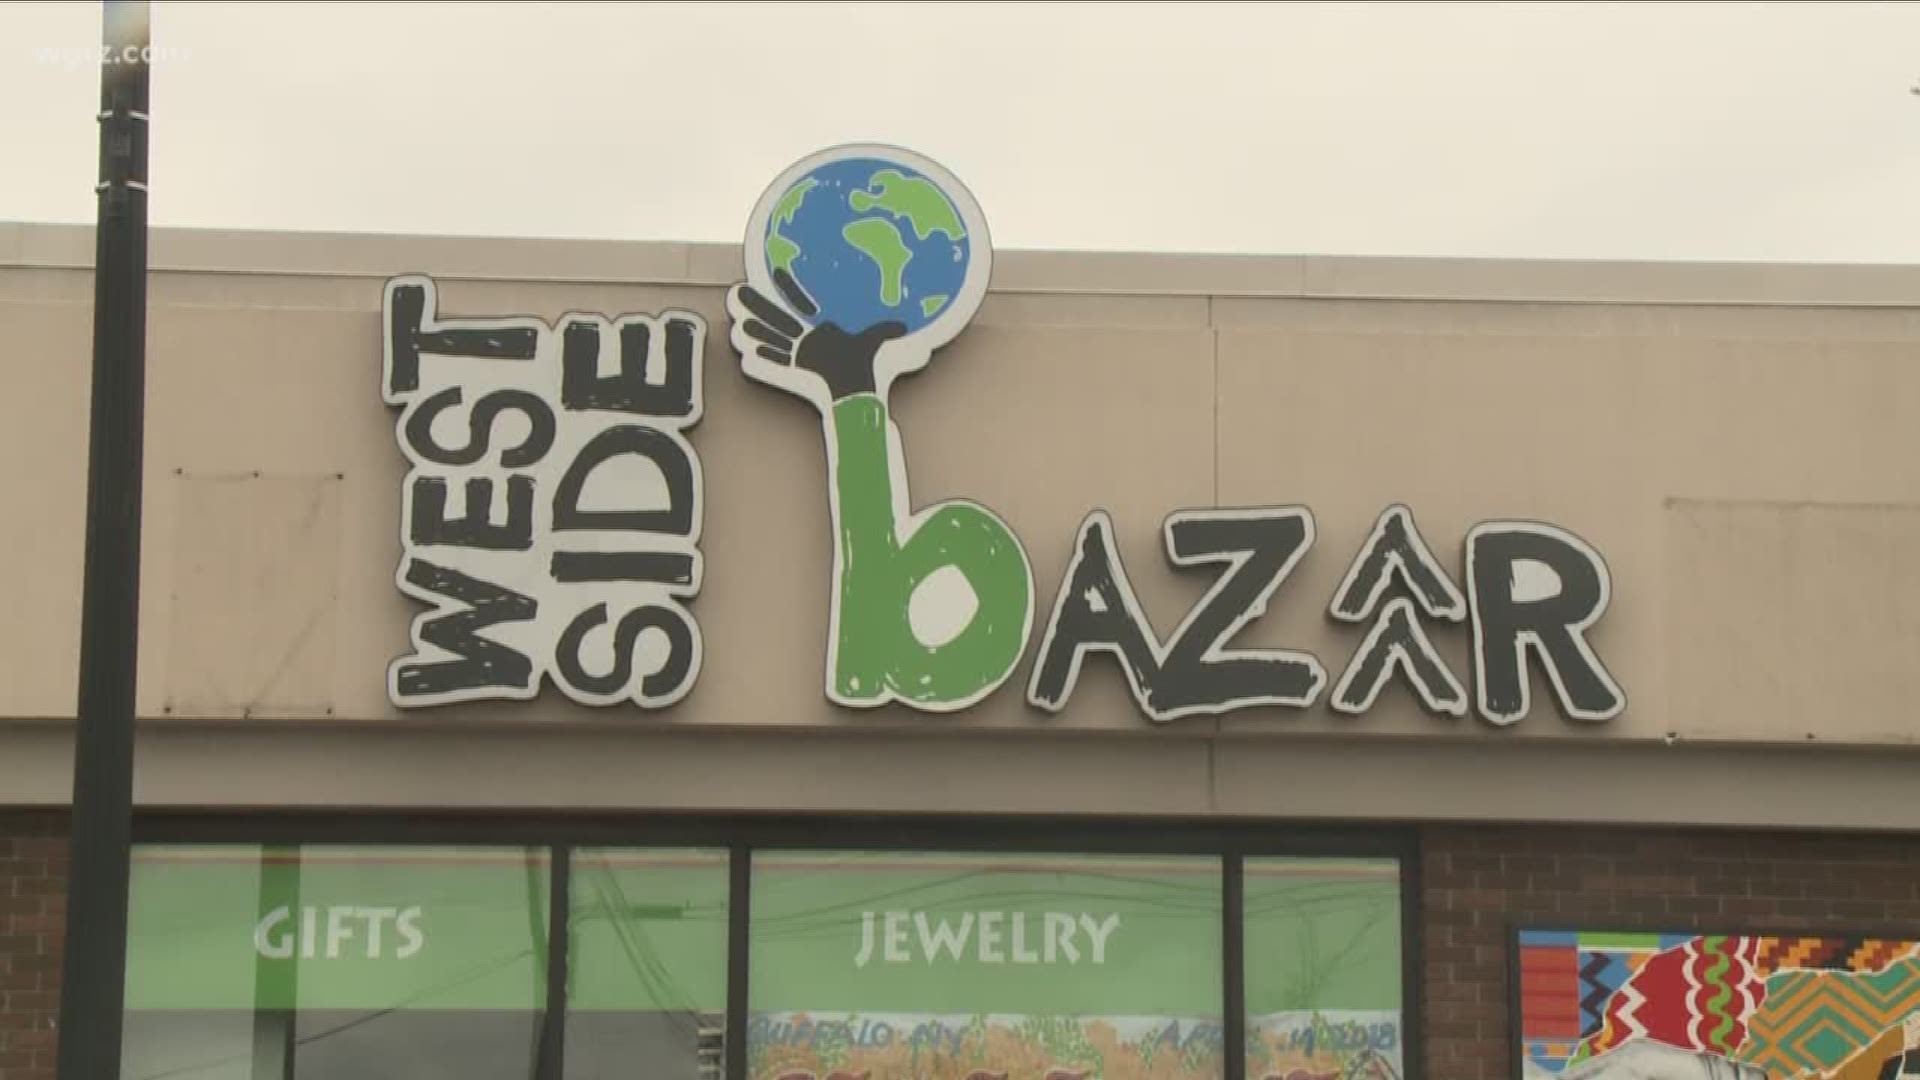 West Side Bazaar moving to new location